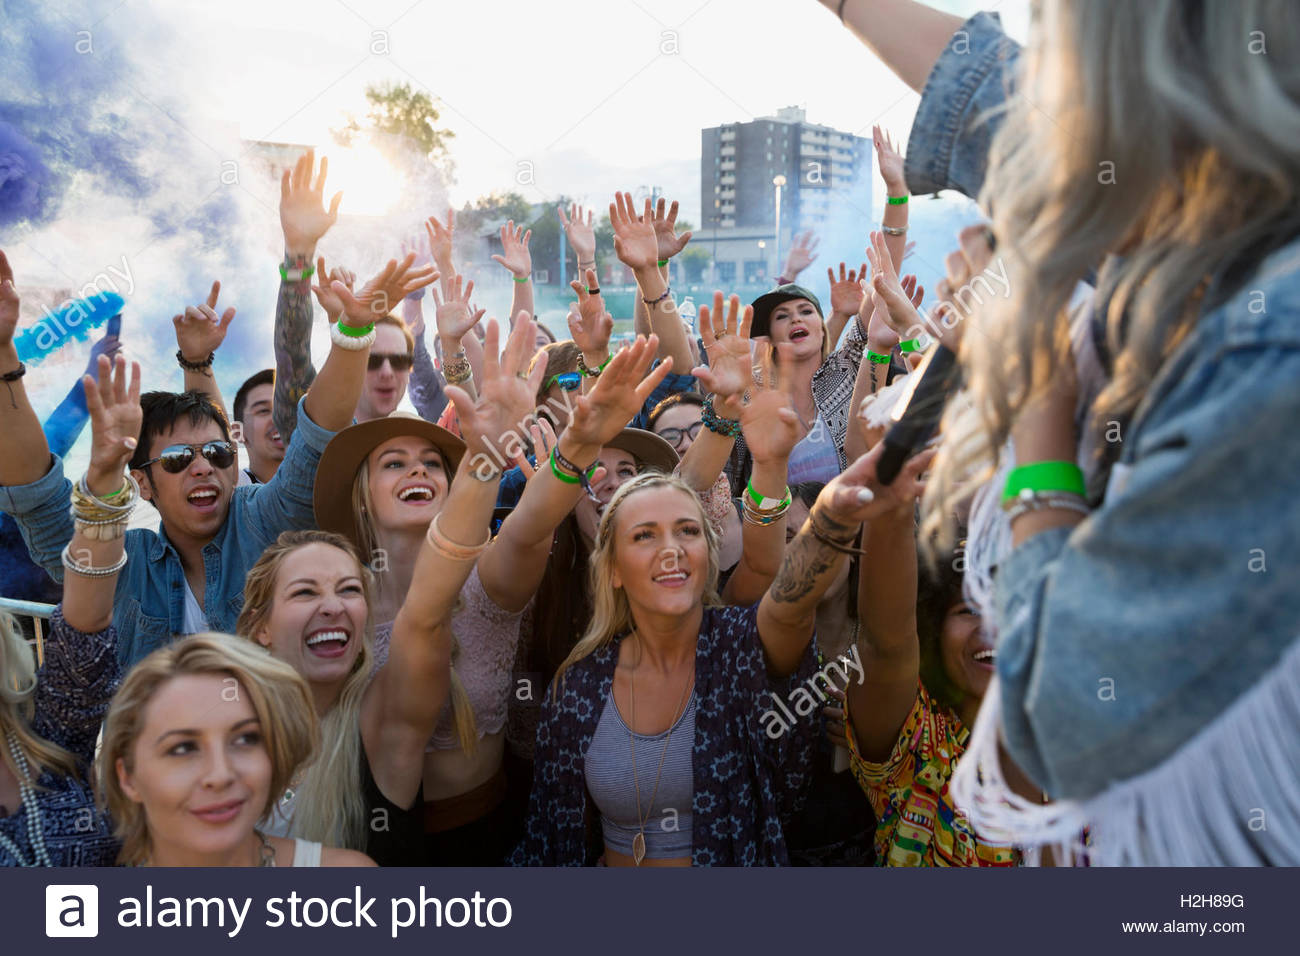 Musician waving to crowd at summer music festival Stock Photo